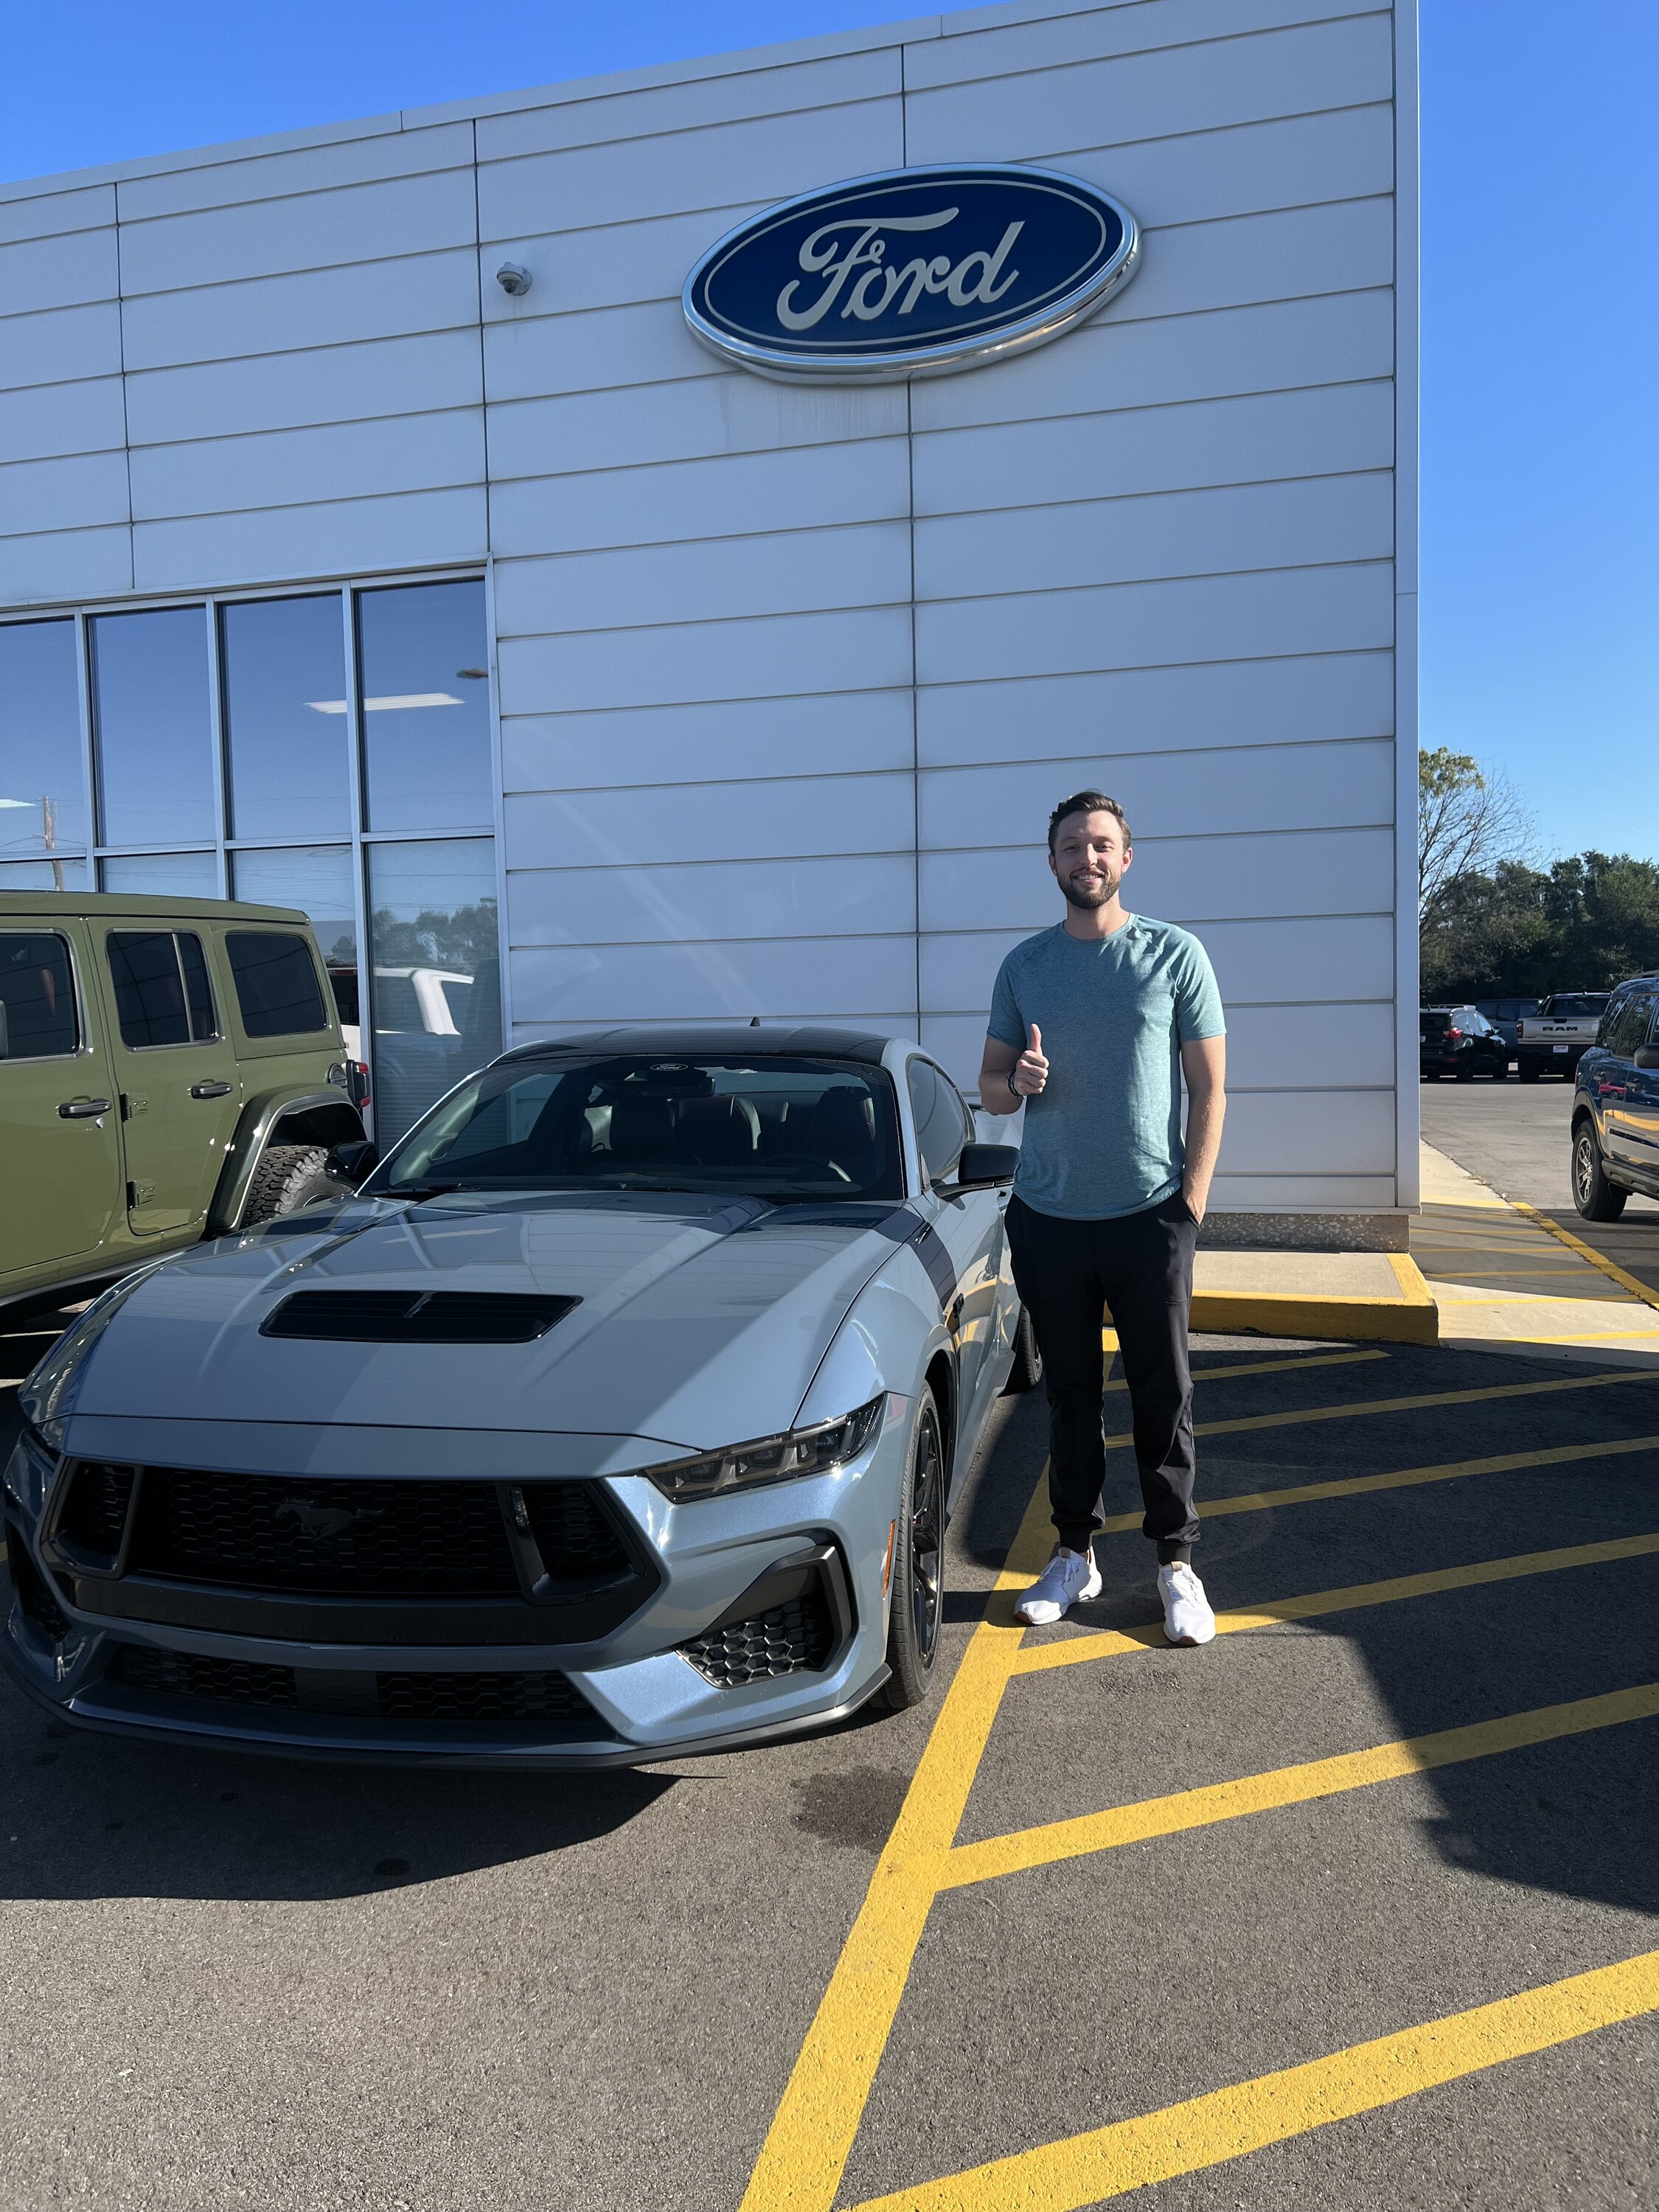 S650 Mustang BUILT & SHIPPED !! Tracker update 2023: What's your status? IMG_5667